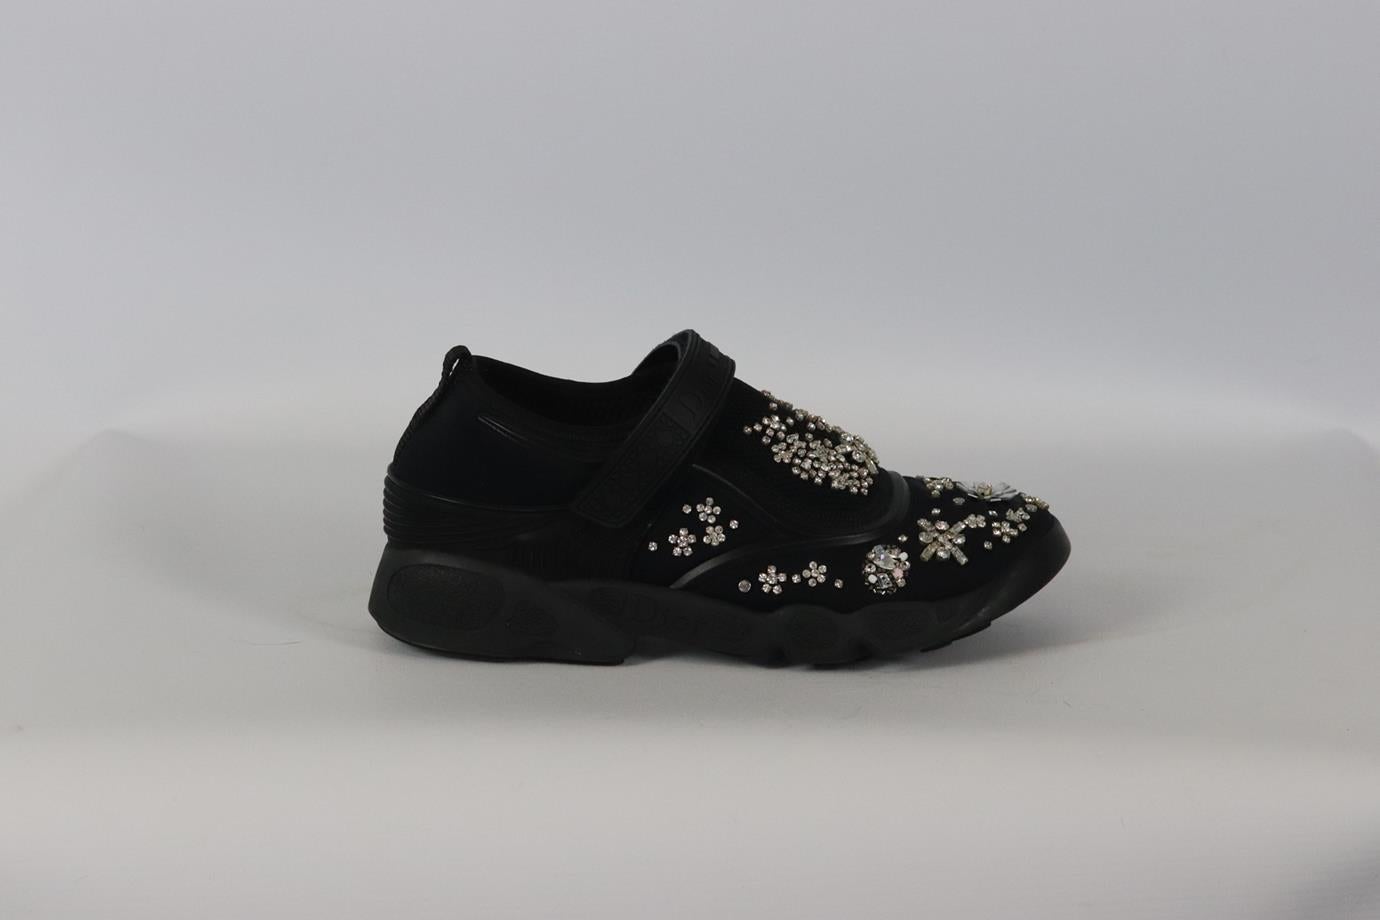 Christian Dior Fusion crystal embellished neoprene sneakers. Black. Fastening at front. Does not come with dustbag or box. Size: EU 38.5 (UK 5.5, US 8.5). Insole: 9 in. Heel height: 1.5 in. Very good condition - Some crystals missing. Some signs of